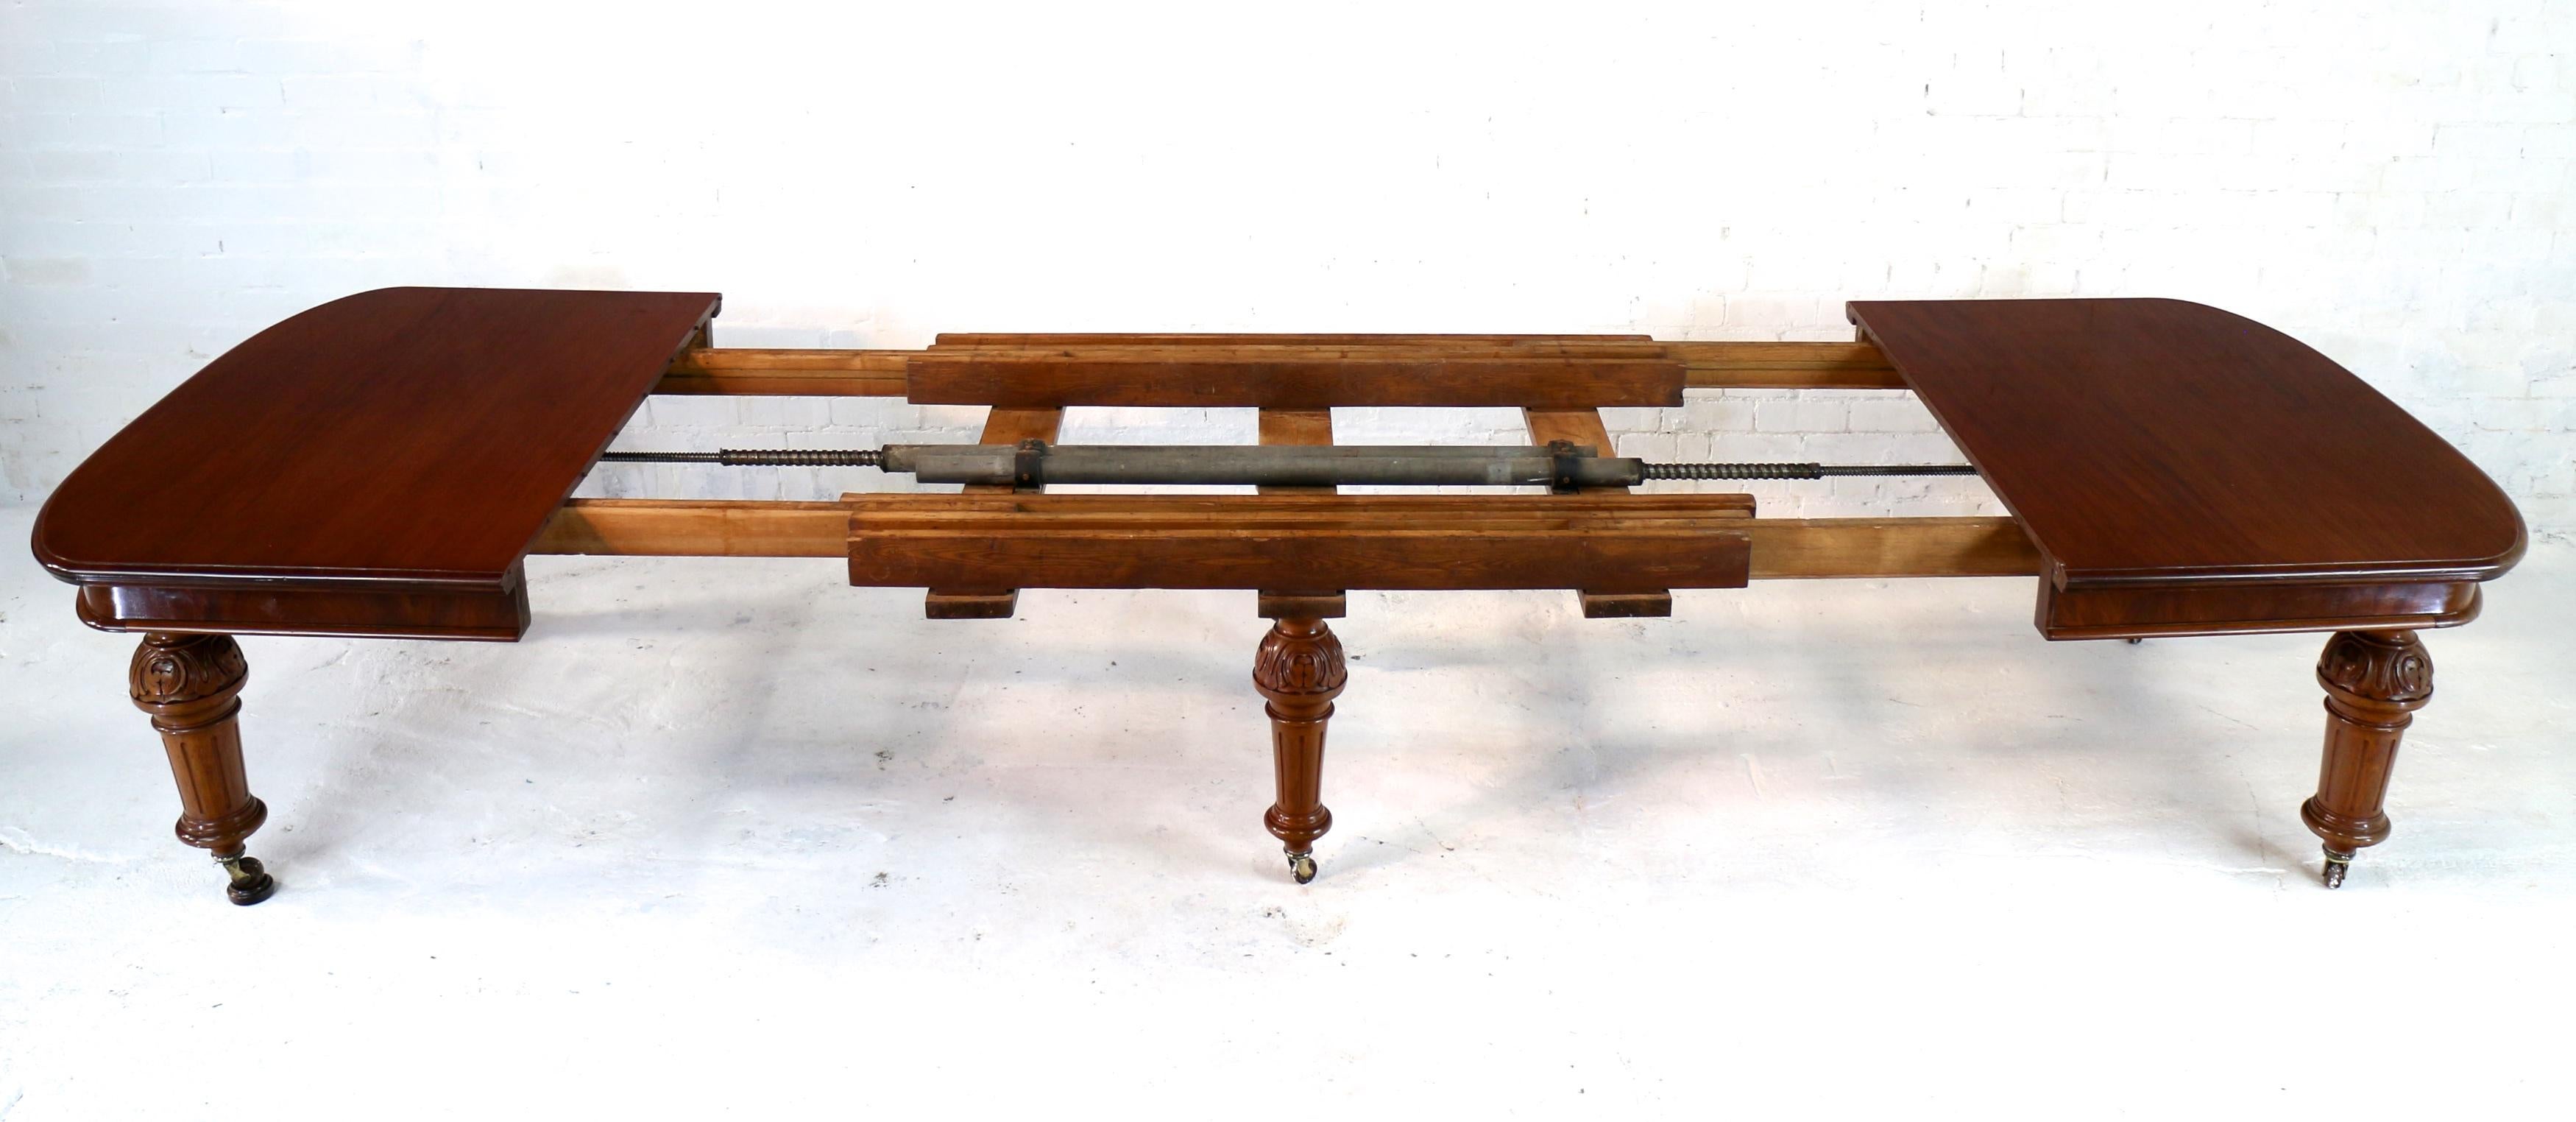 Antique English Victorian Mahogany Extending Dining Table and 4 Leaves, Seats 16 For Sale 1